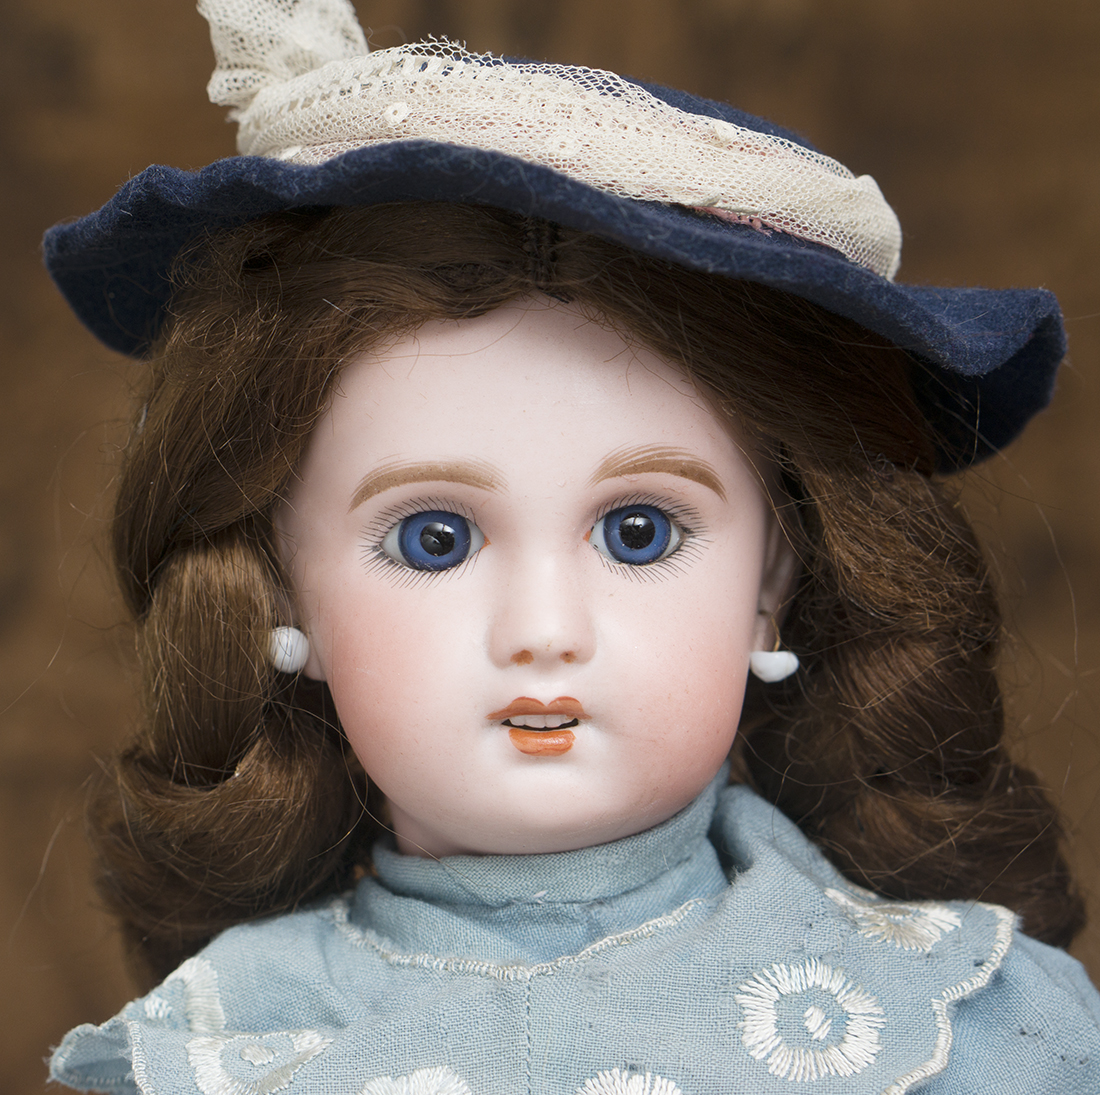 Antique French Bisque Bebe doll by SFBJ 